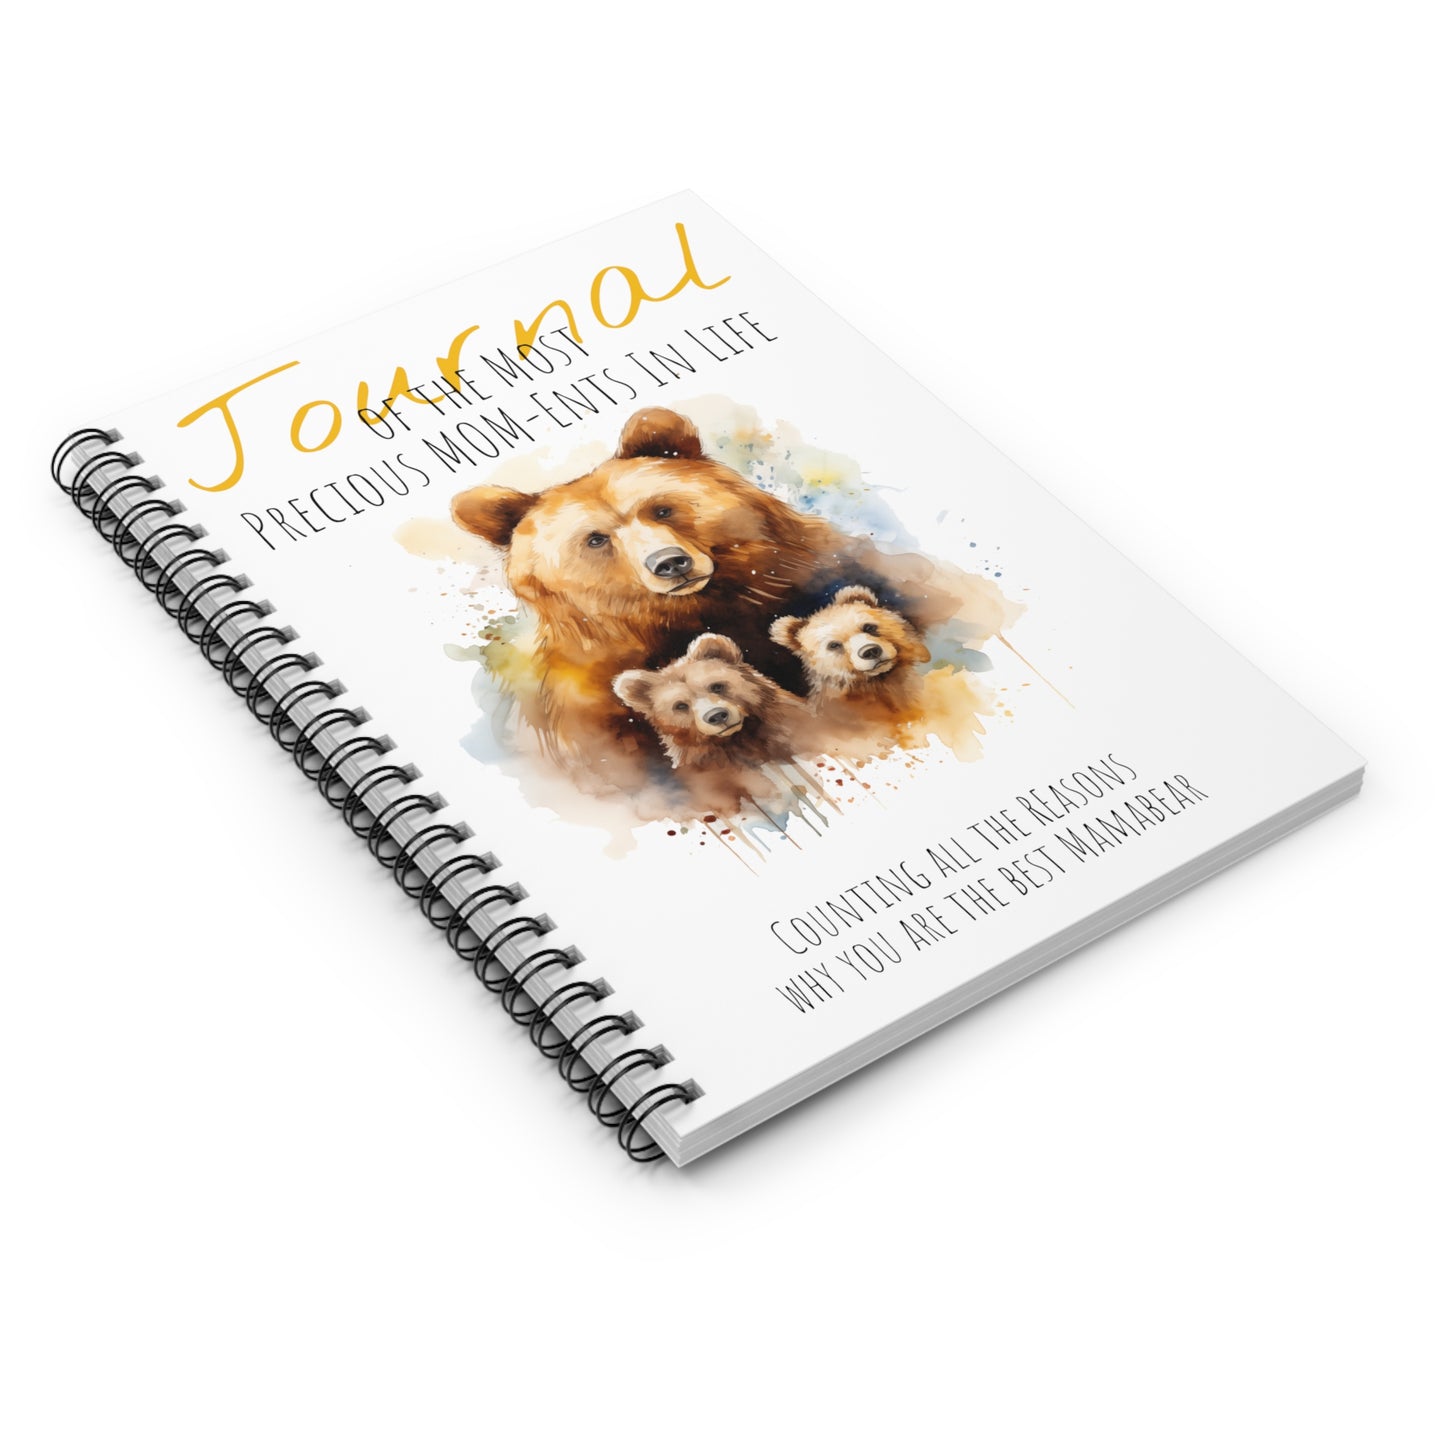 Happy Mother's Day / Mothers Day / Mamabear - "Journal of Best Mom-ents" - Edition - Perfect Mother Gift - Spiral Notebook - Ruled Line